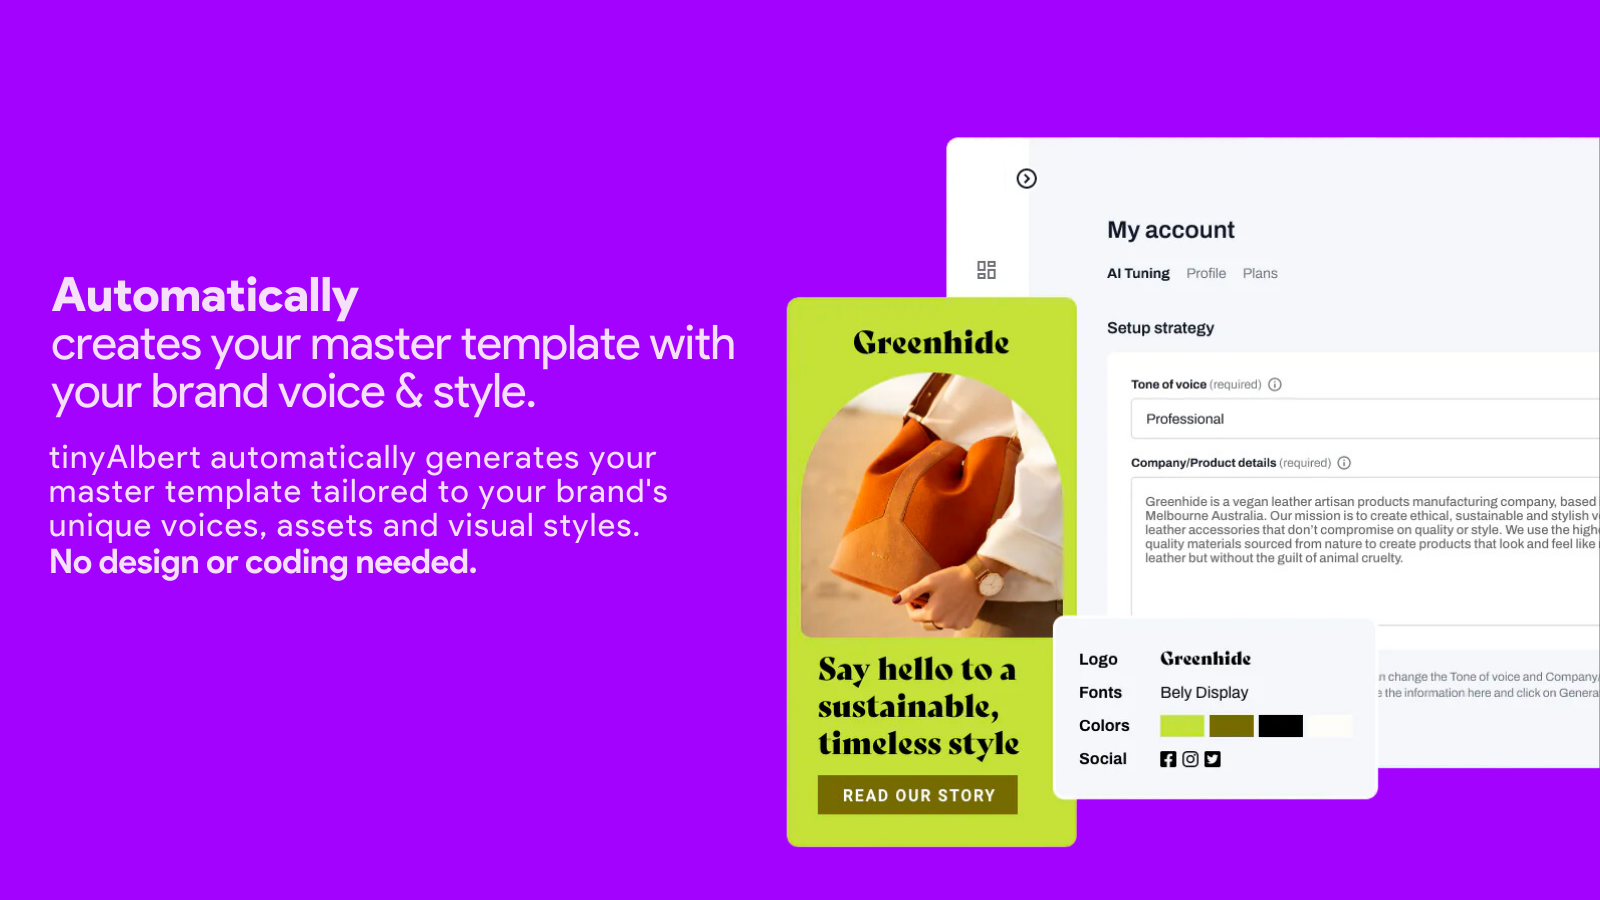 Create your master template with your brand voice and style.